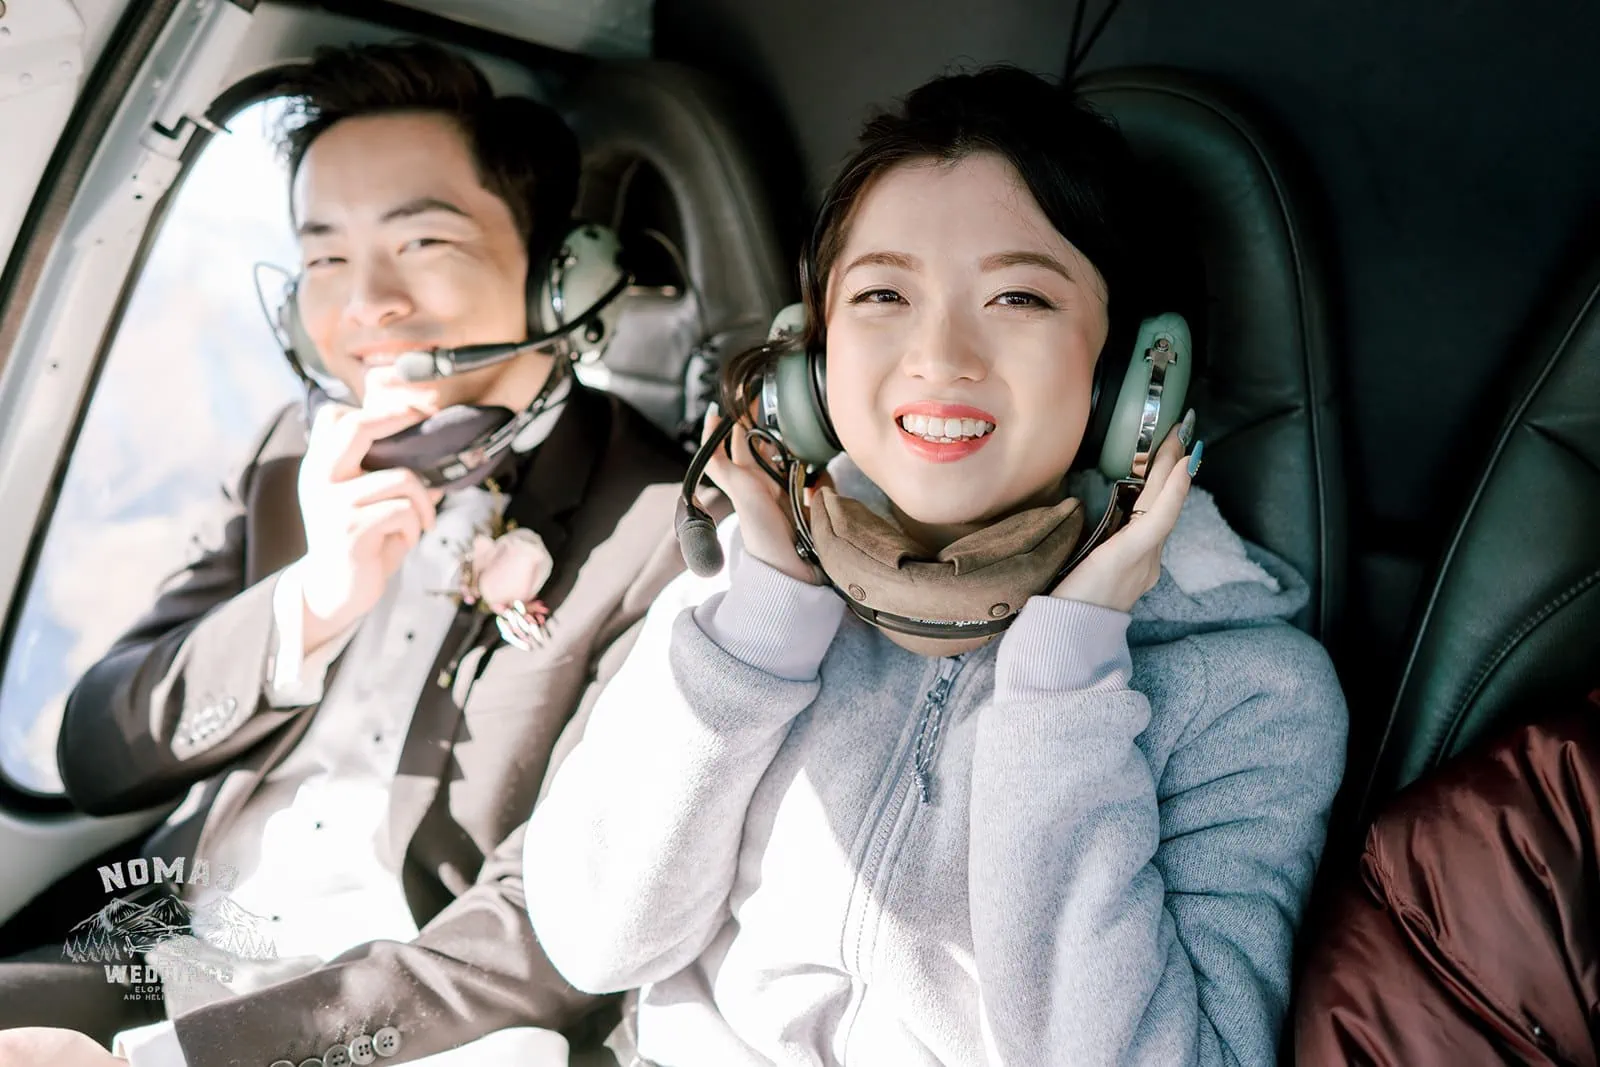 Queenstown New Zealand Elopement Wedding Photographer - Keywords used: Bo and Junyi, helicopter

Description: Bo and Junyi enjoying a pre-wedding photo shoot in a helicopter.